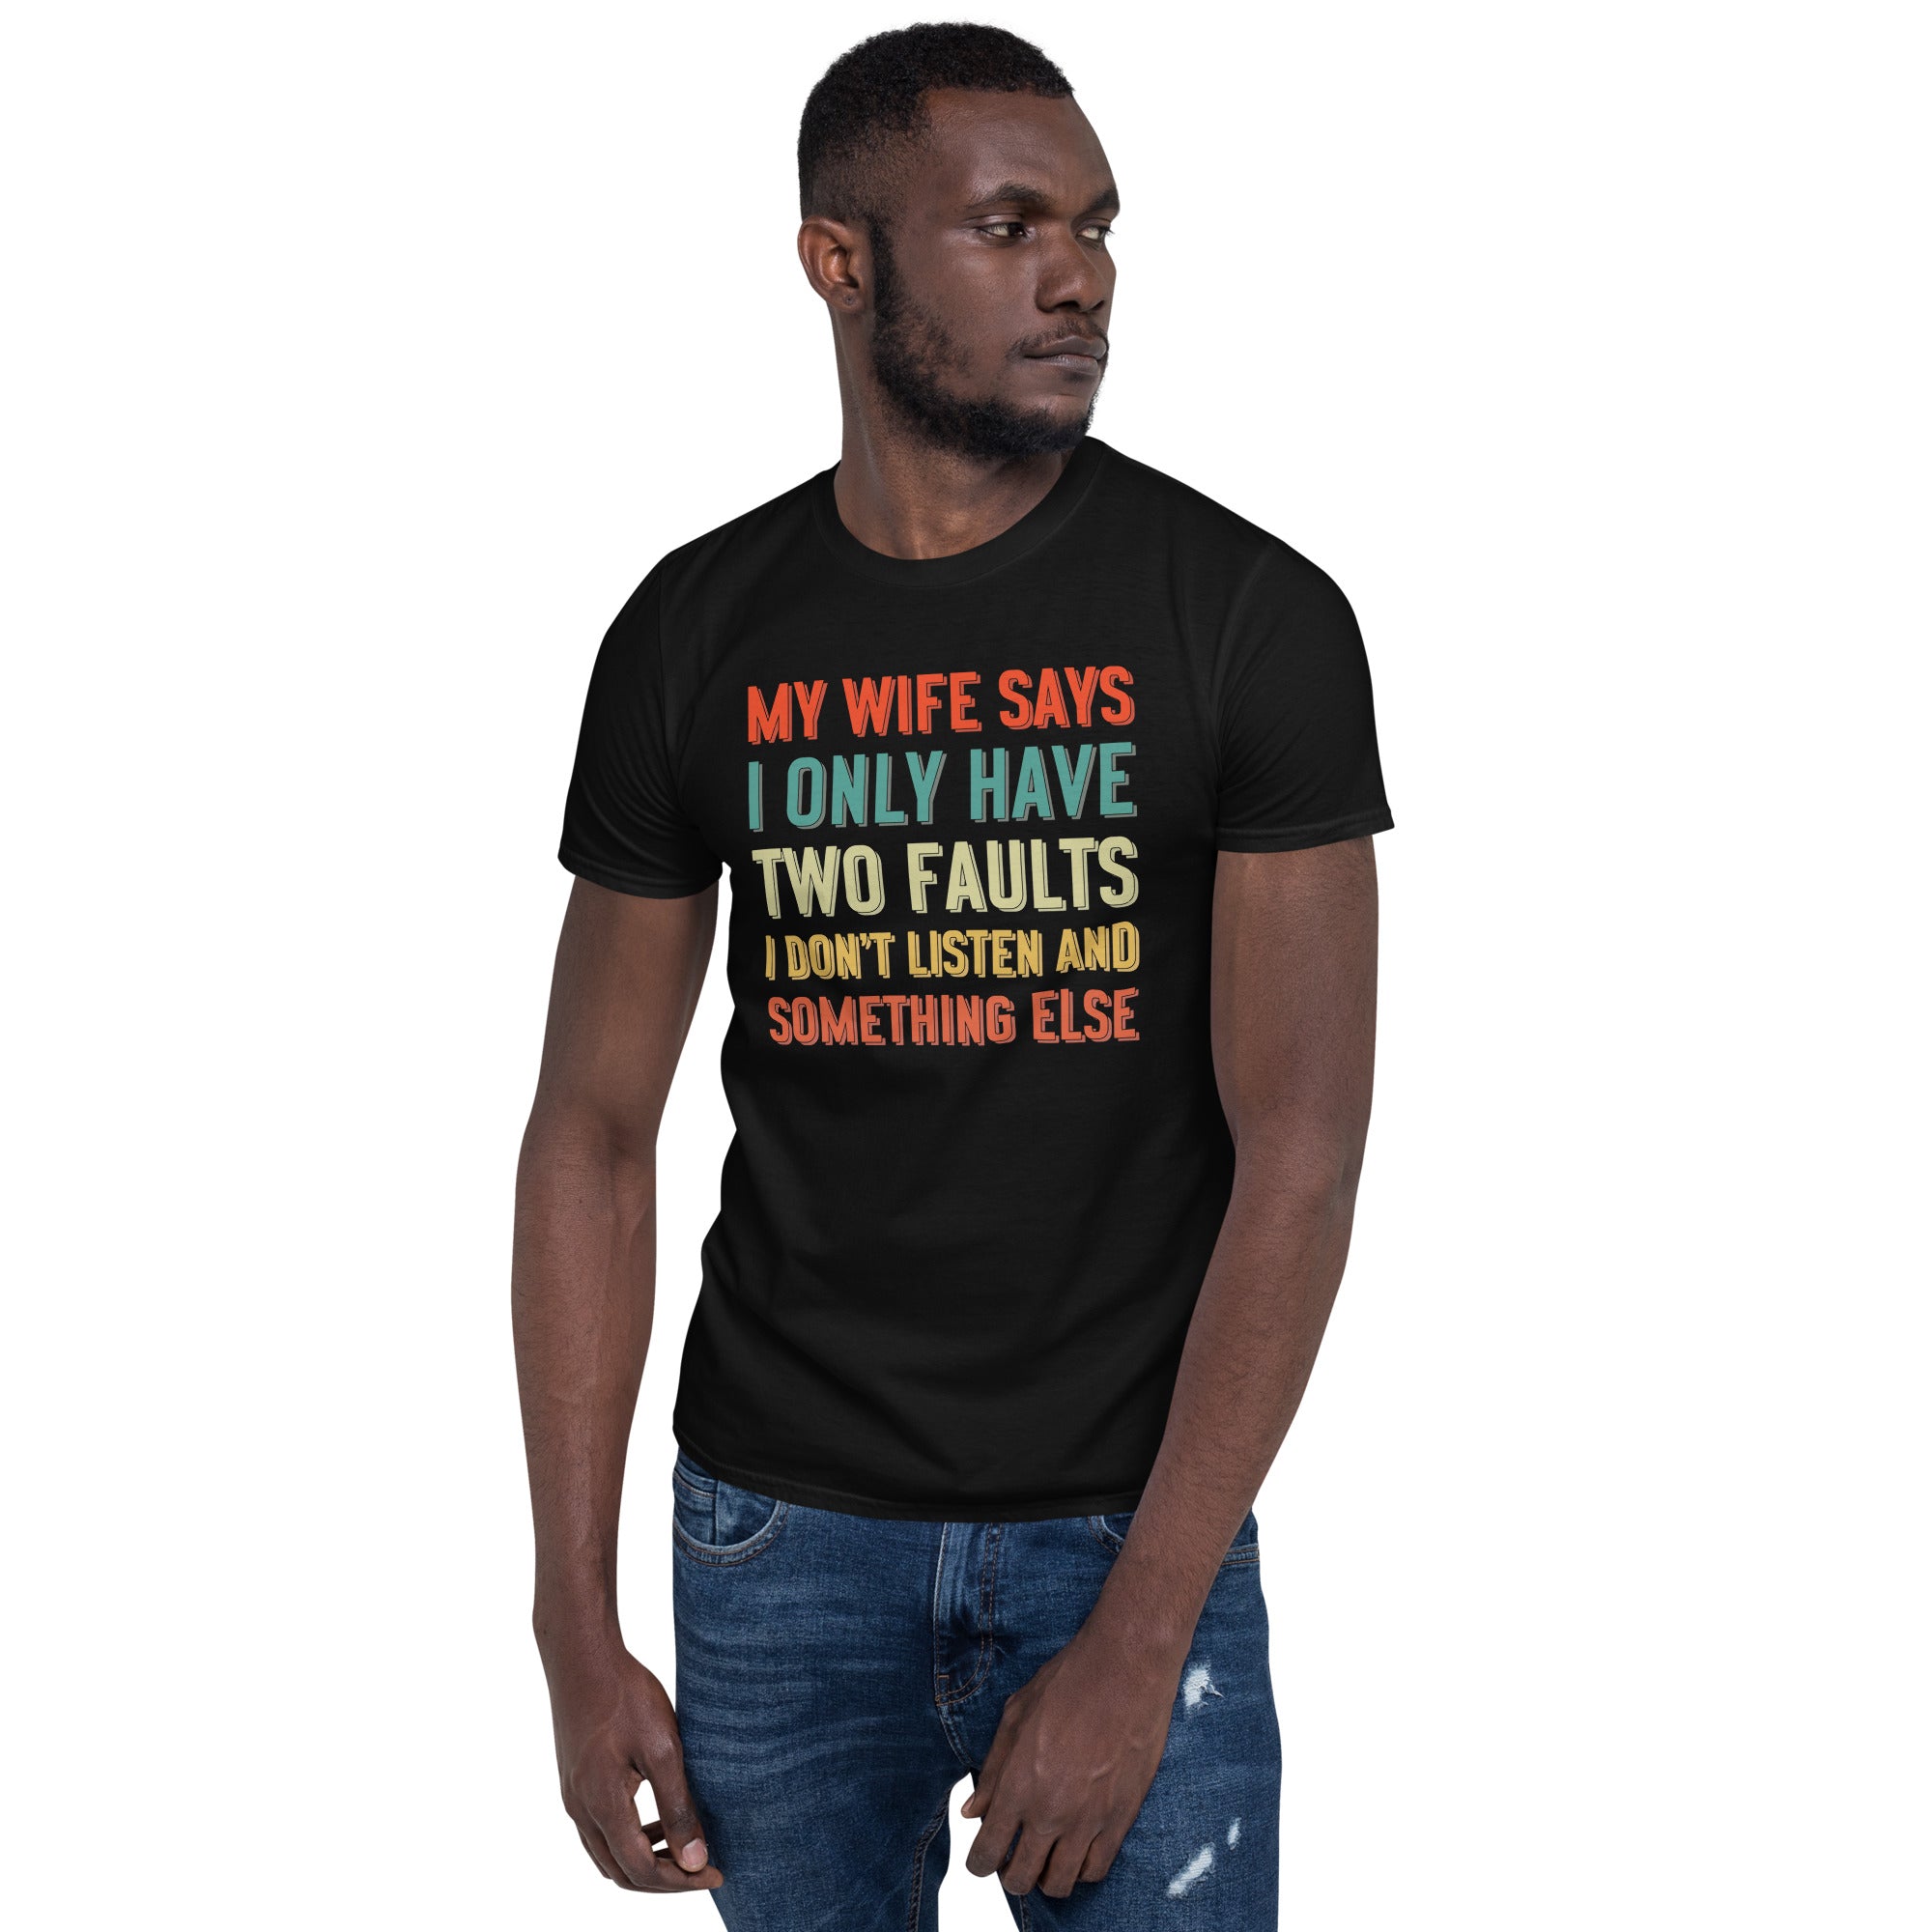 My Wife Says I Only Have Two Faults - Short-Sleeve Unisex T-Shirt